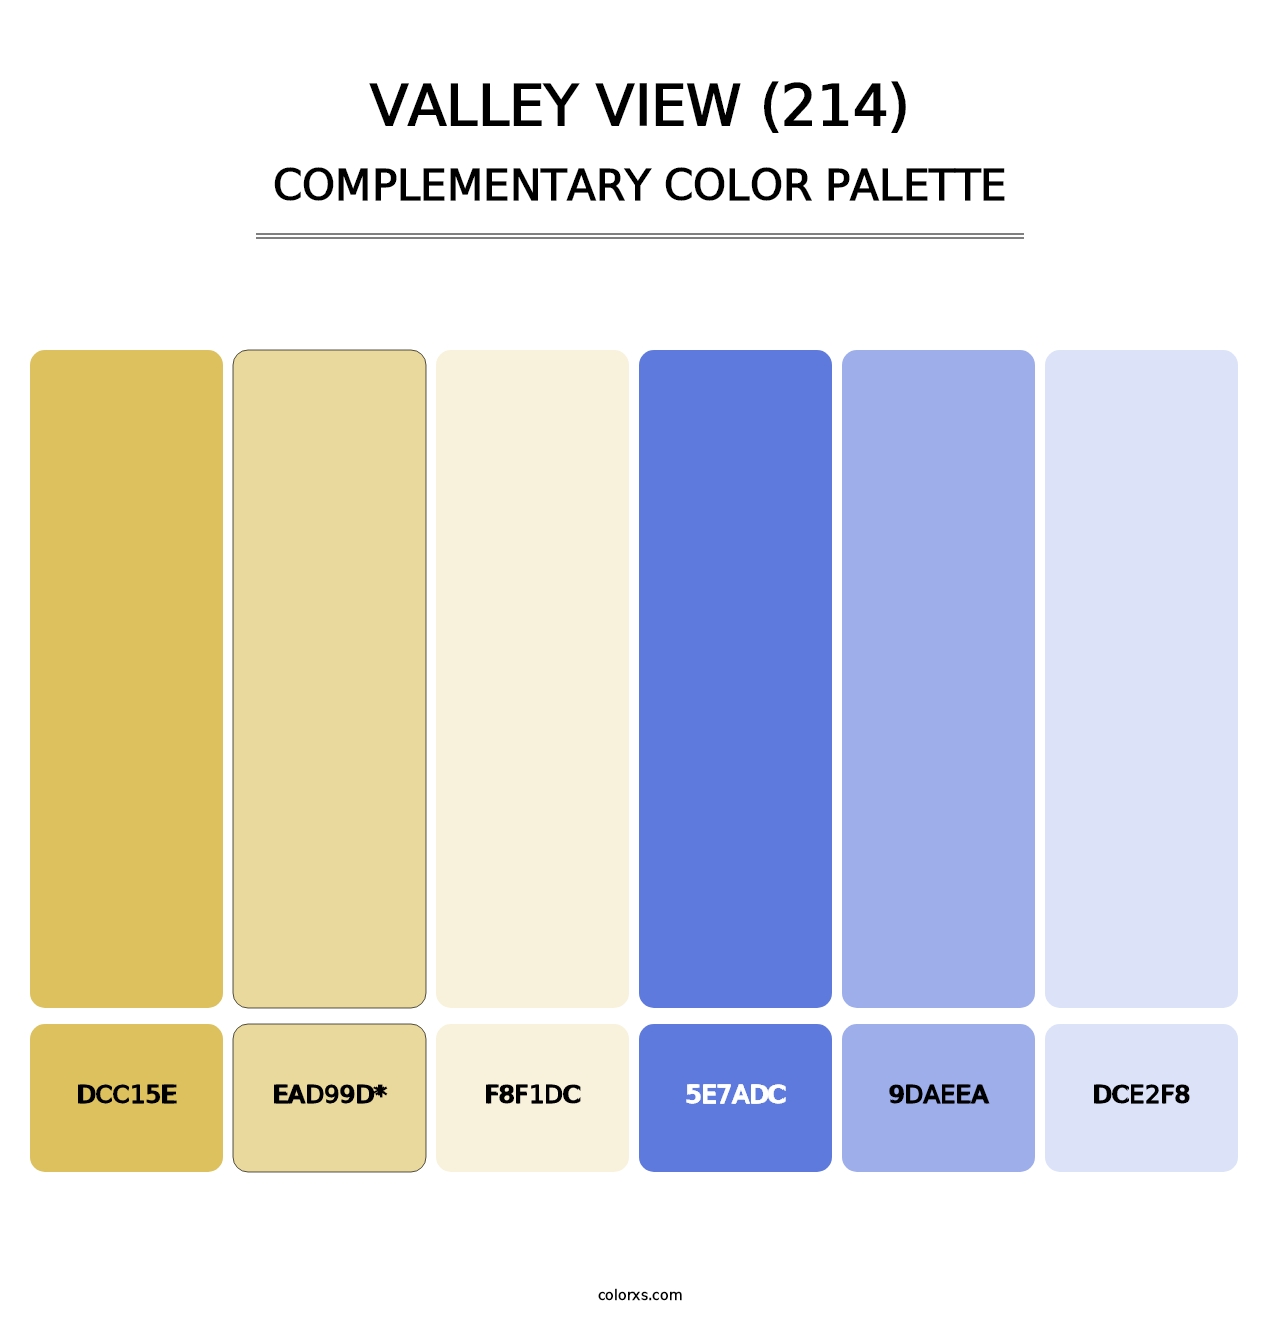 Valley View (214) - Complementary Color Palette